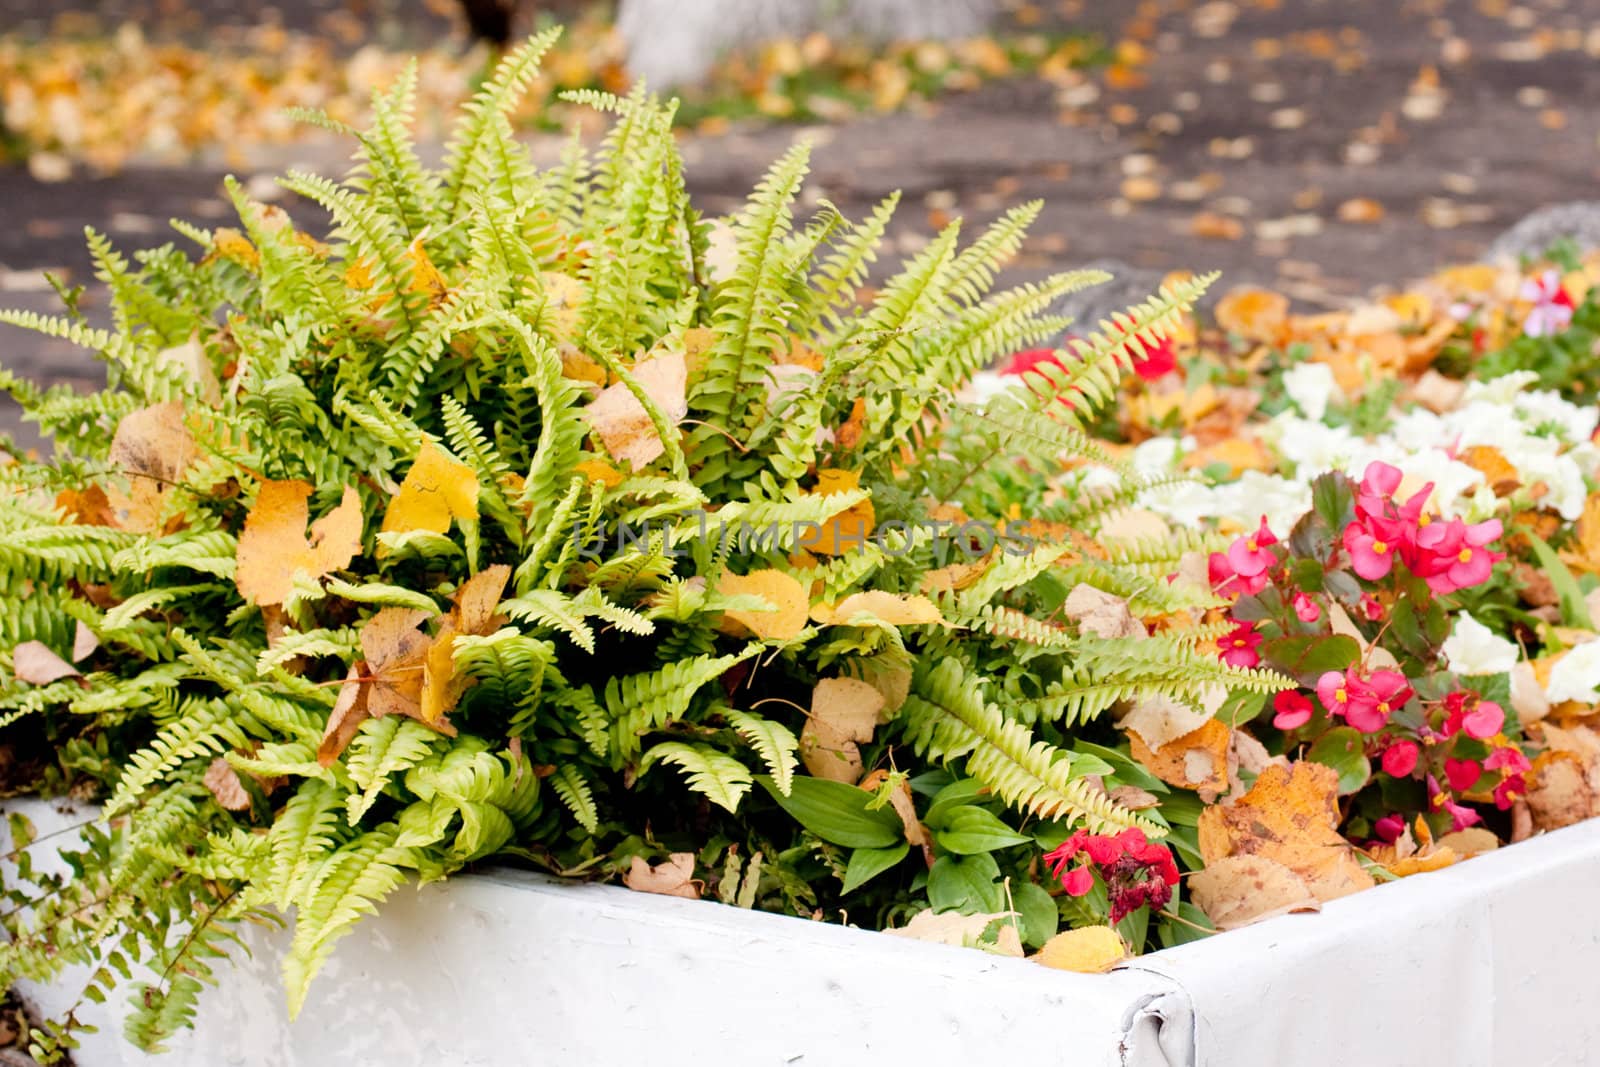 An autumn flowerbed with fern, flowers and yellow leaves
